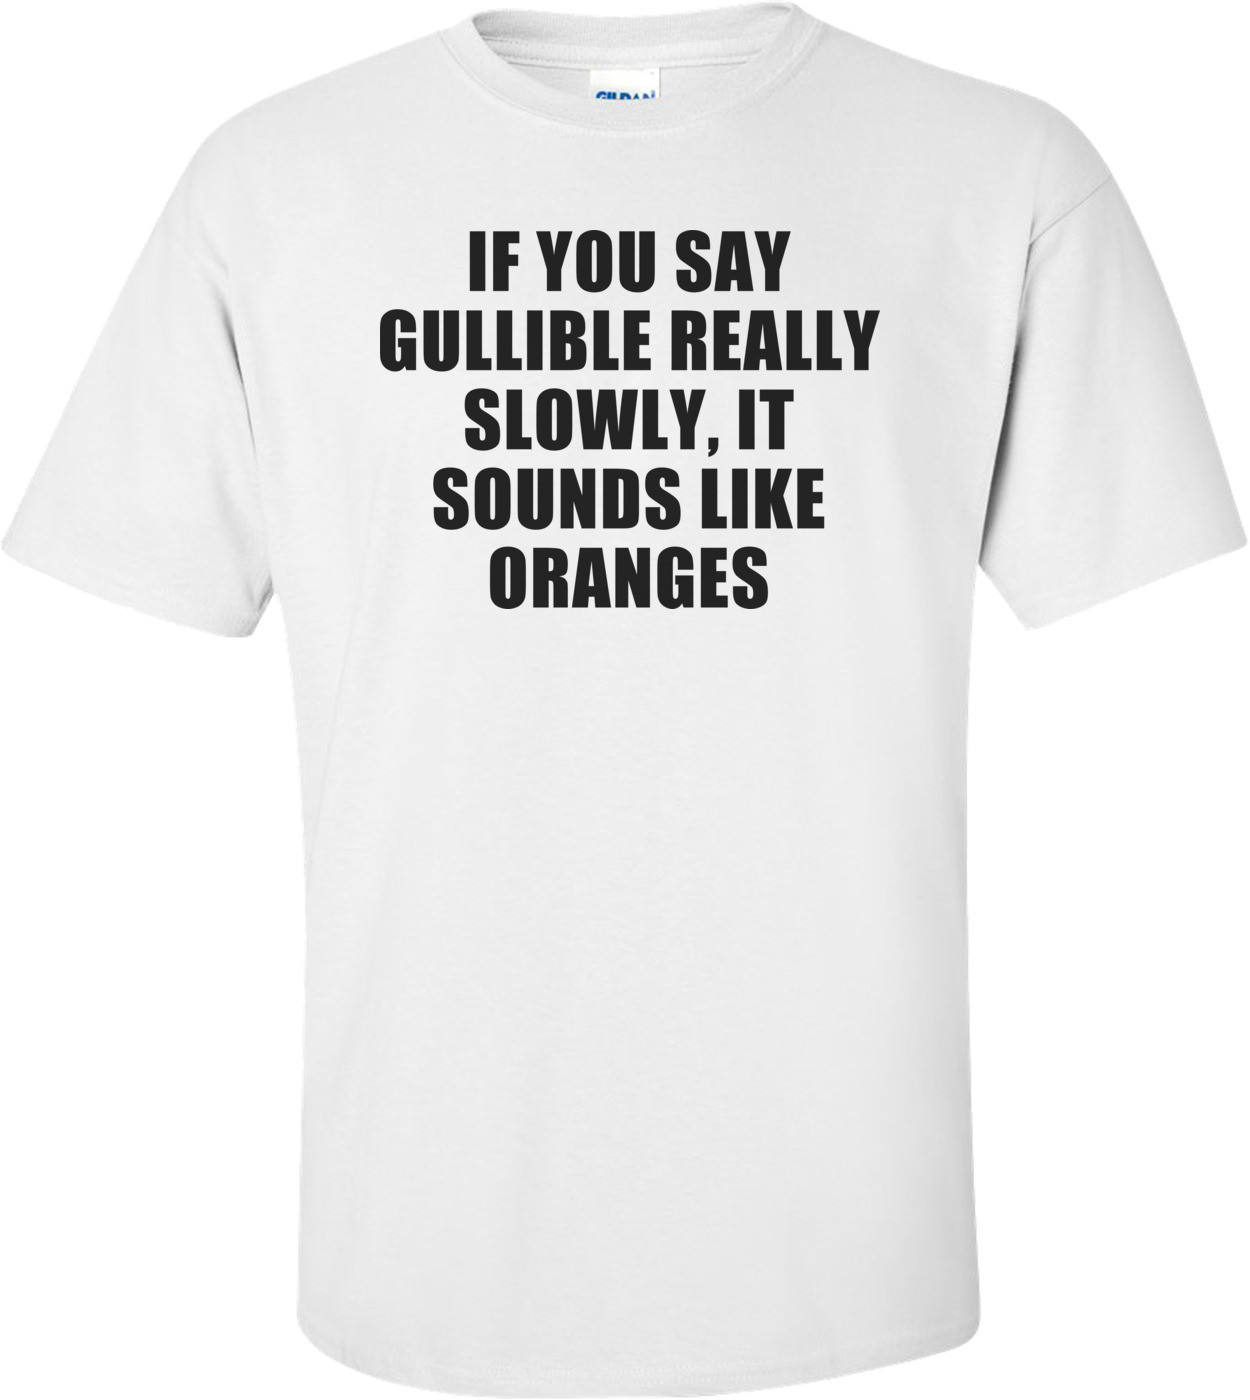 If You Say Gullible Really Slowly, It Sounds Like Oranges Funny T-shirt